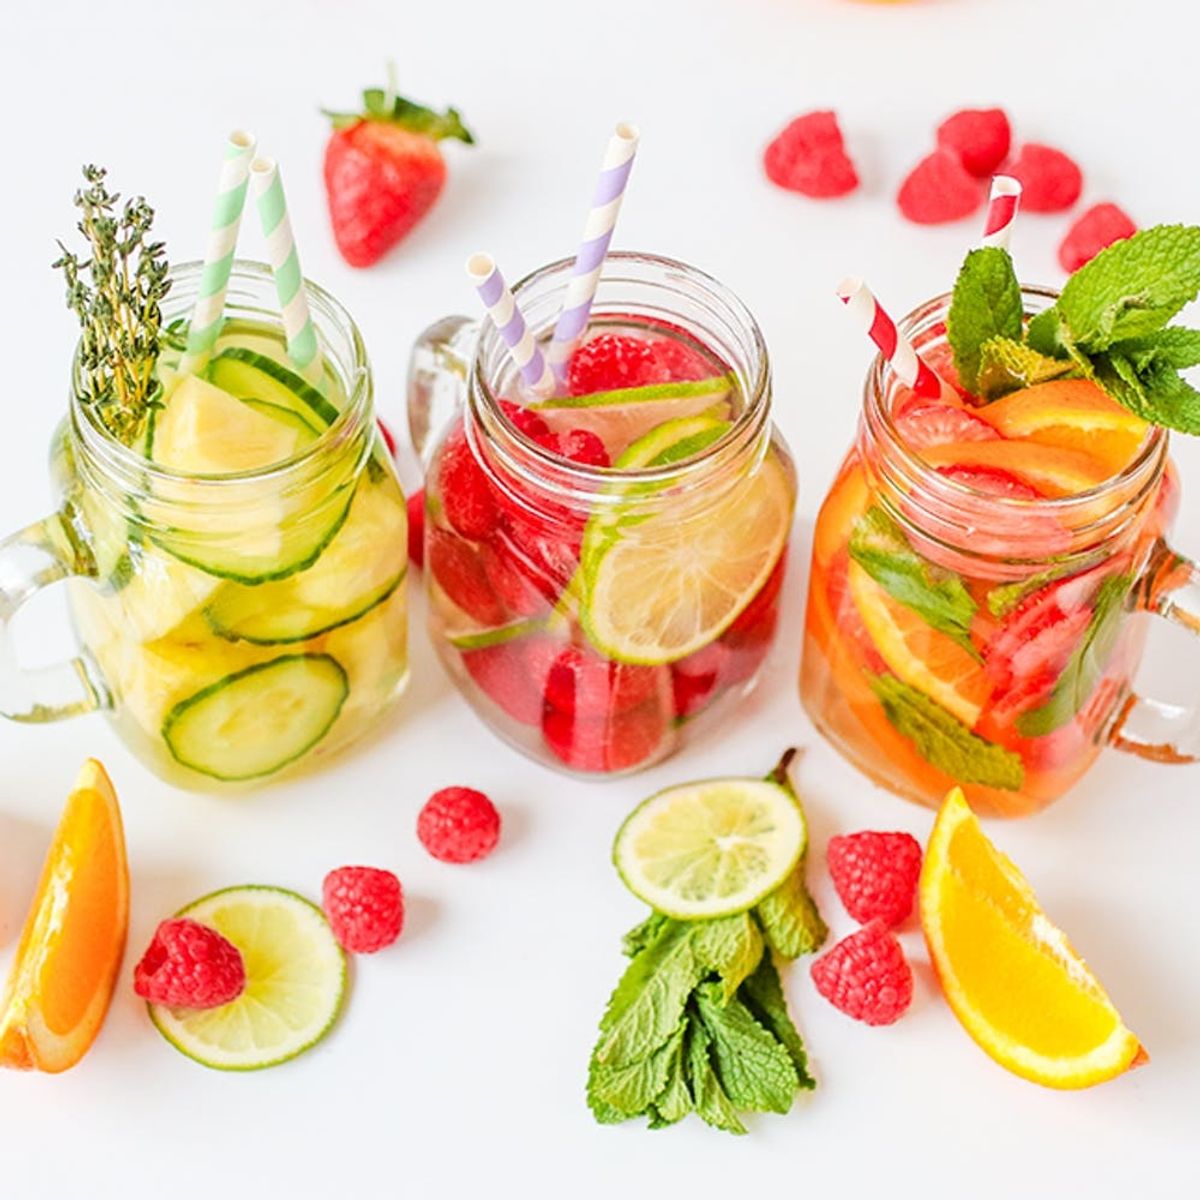 Fruit Infusions Are the New Green Smoothie